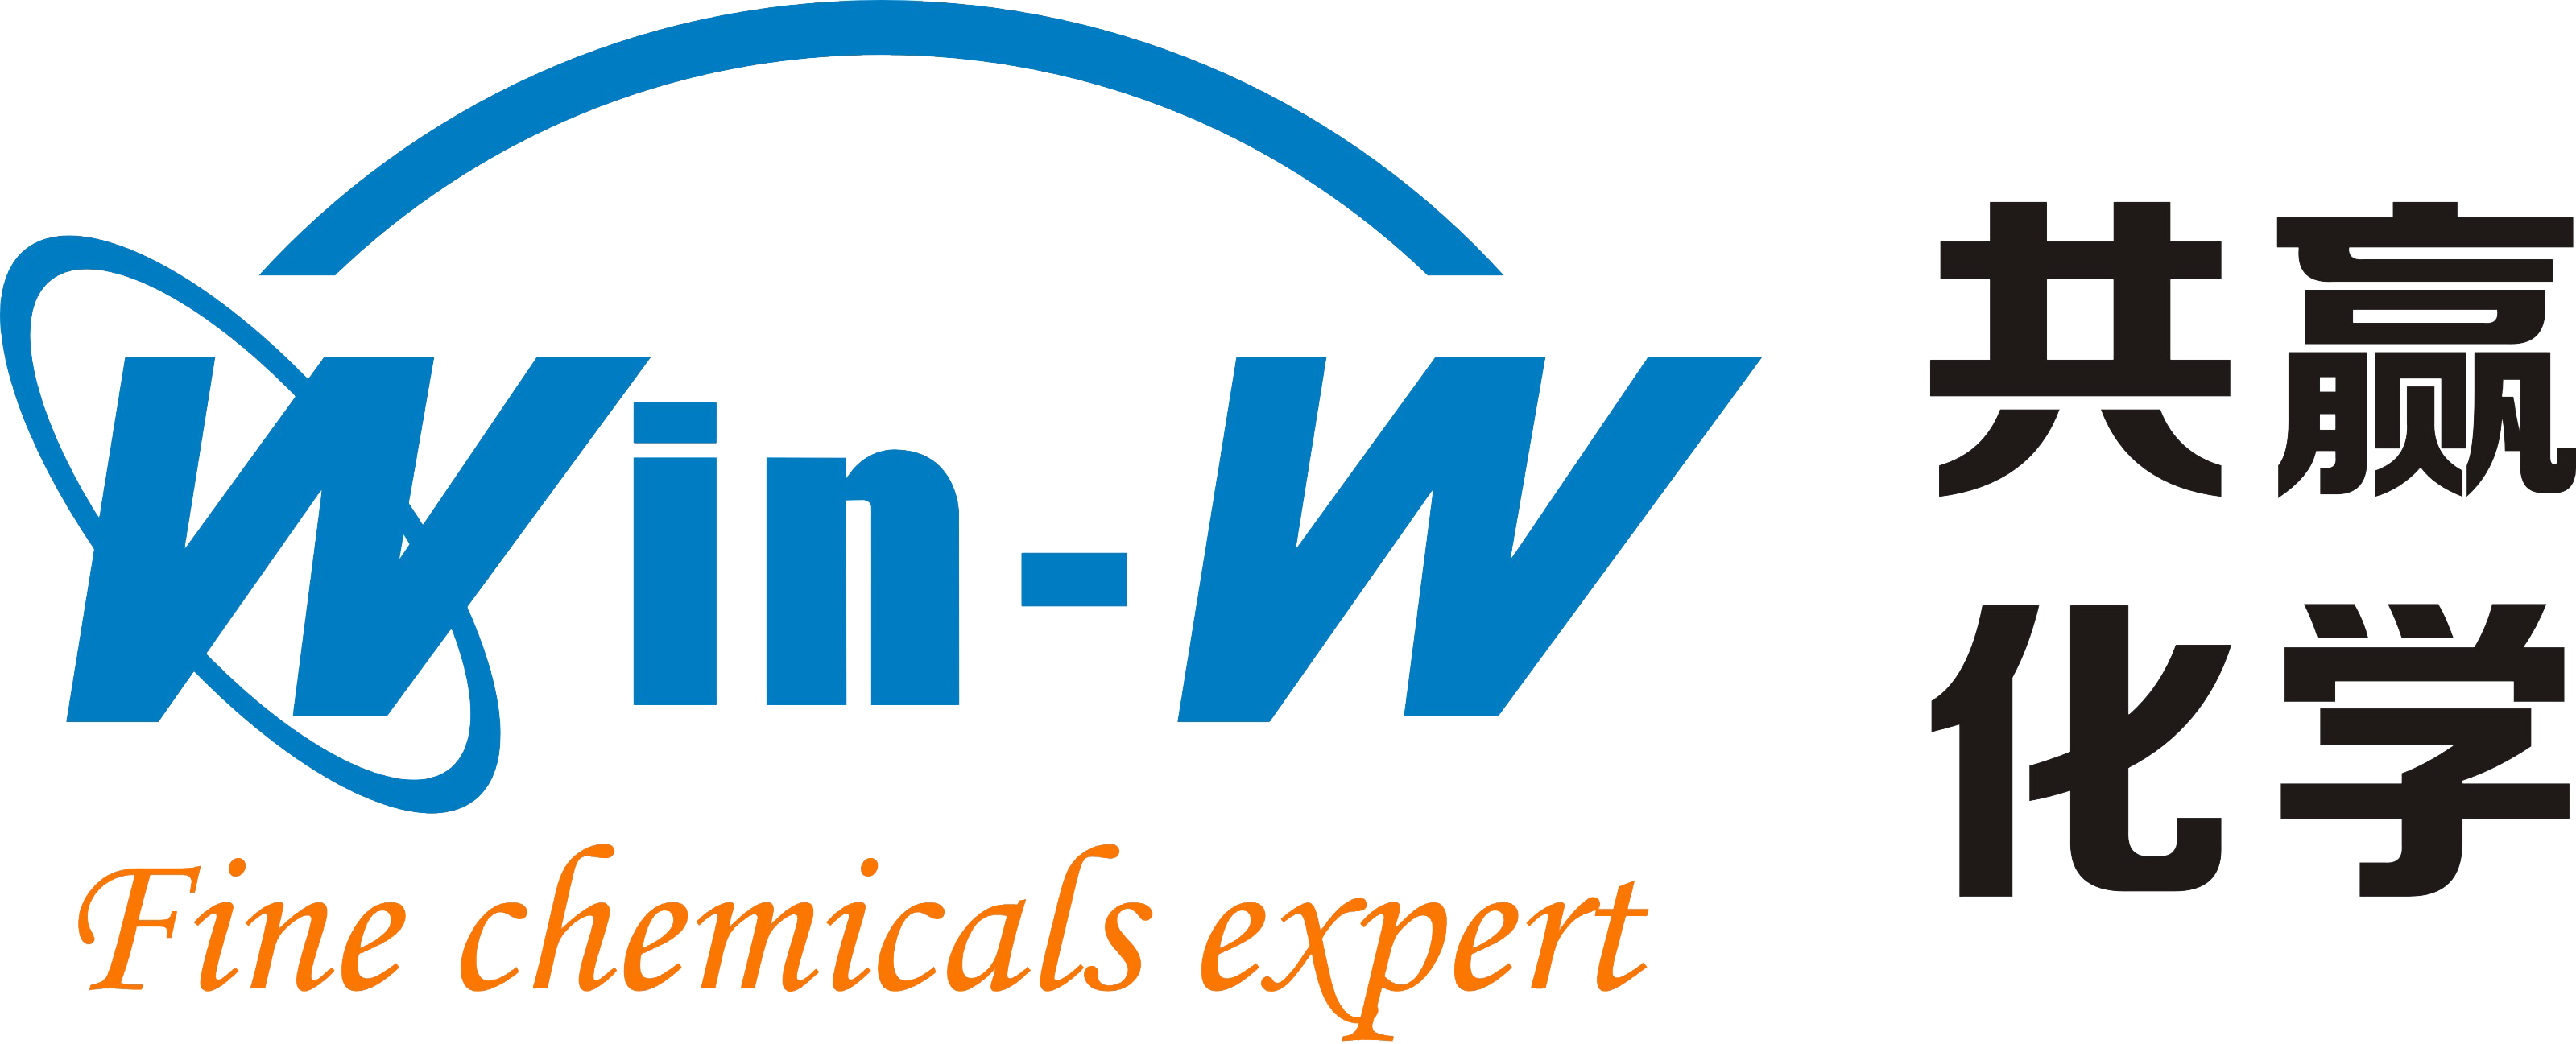 Win-Win chemical CO., Limited